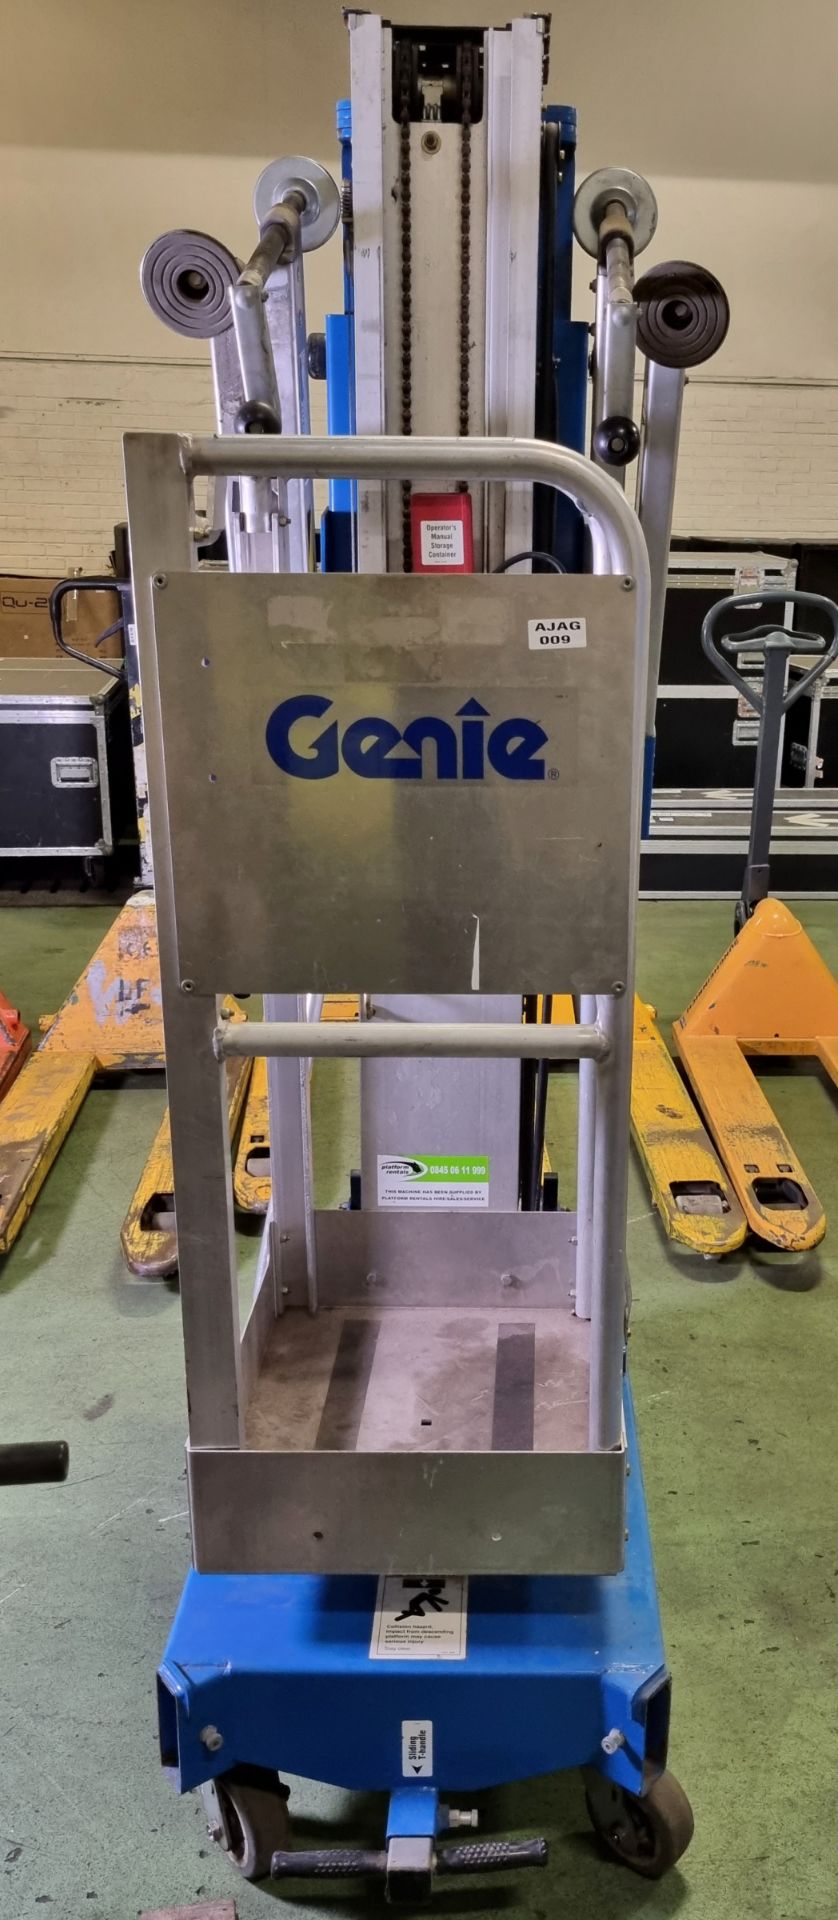 Genie AWP-20S access platform - serial number AWP02-23454 - 2002 model - max. load 350lbs - Image 3 of 6